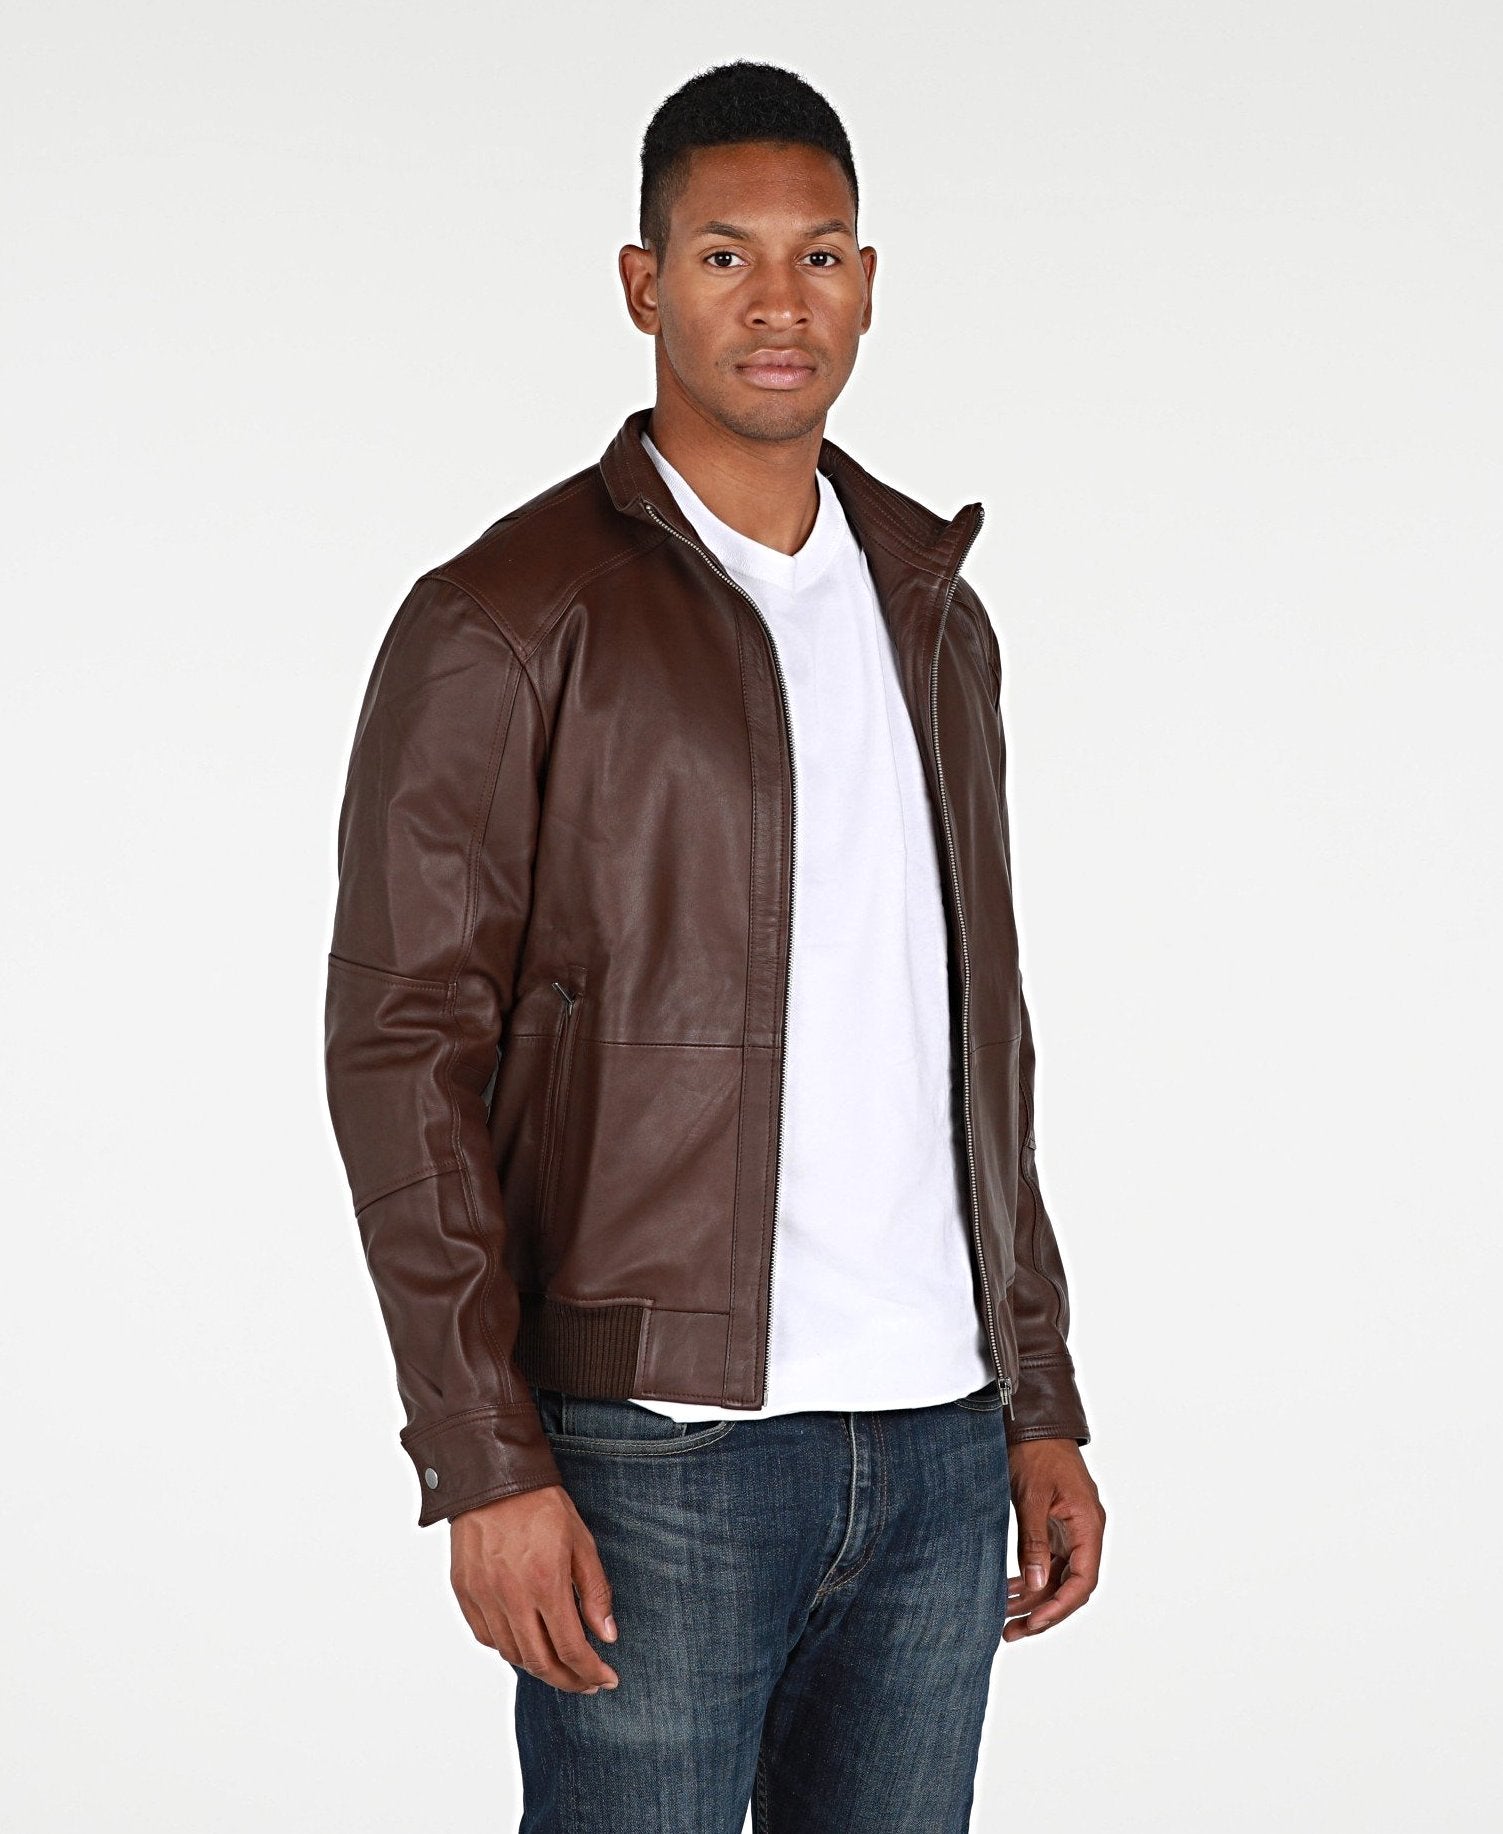 Buy Leather Retail Pure Genuine Leather Biker Jacket For Men at Amazon.in